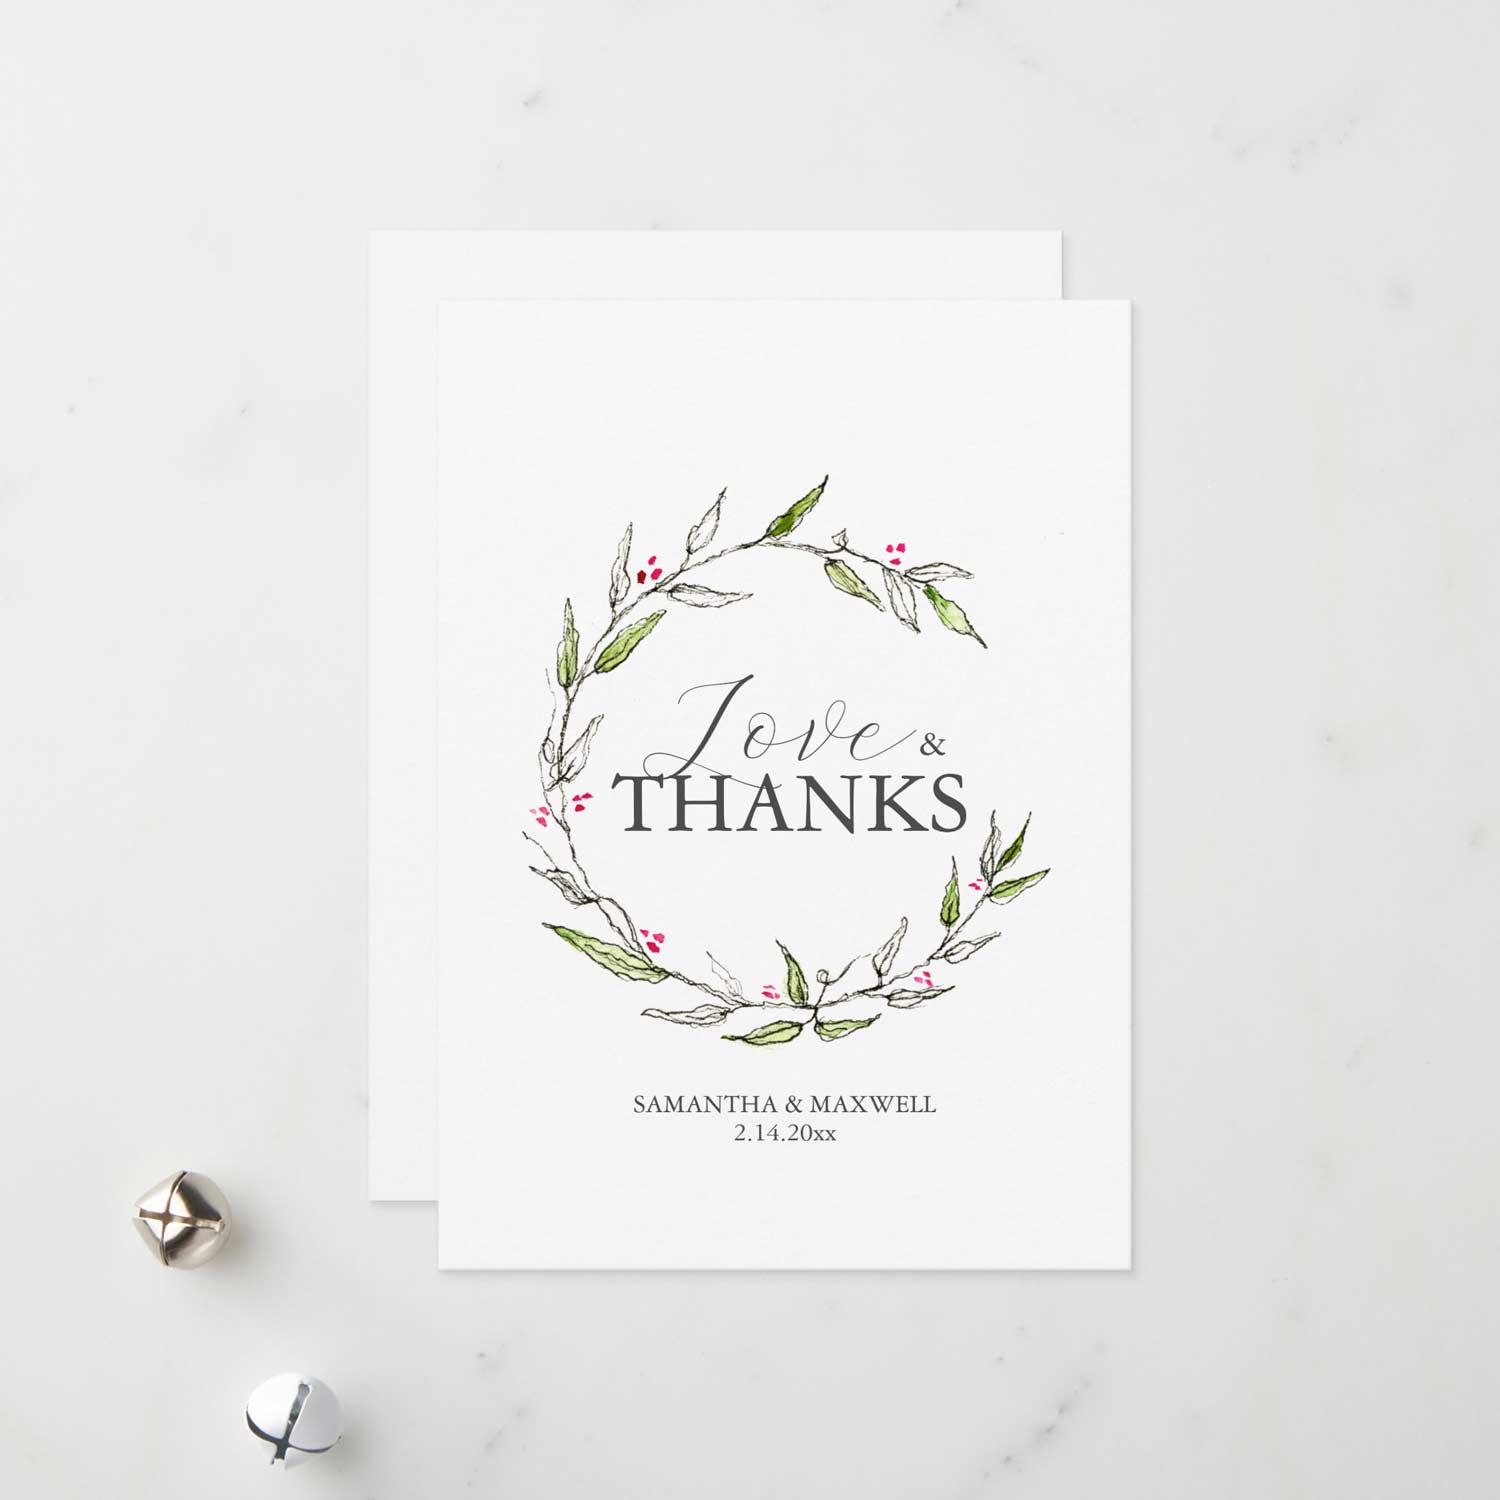 Printable Christmas cards features unique watercolor art by Victoria Grigaliunas. Download your digital file. Click on the image to see how.